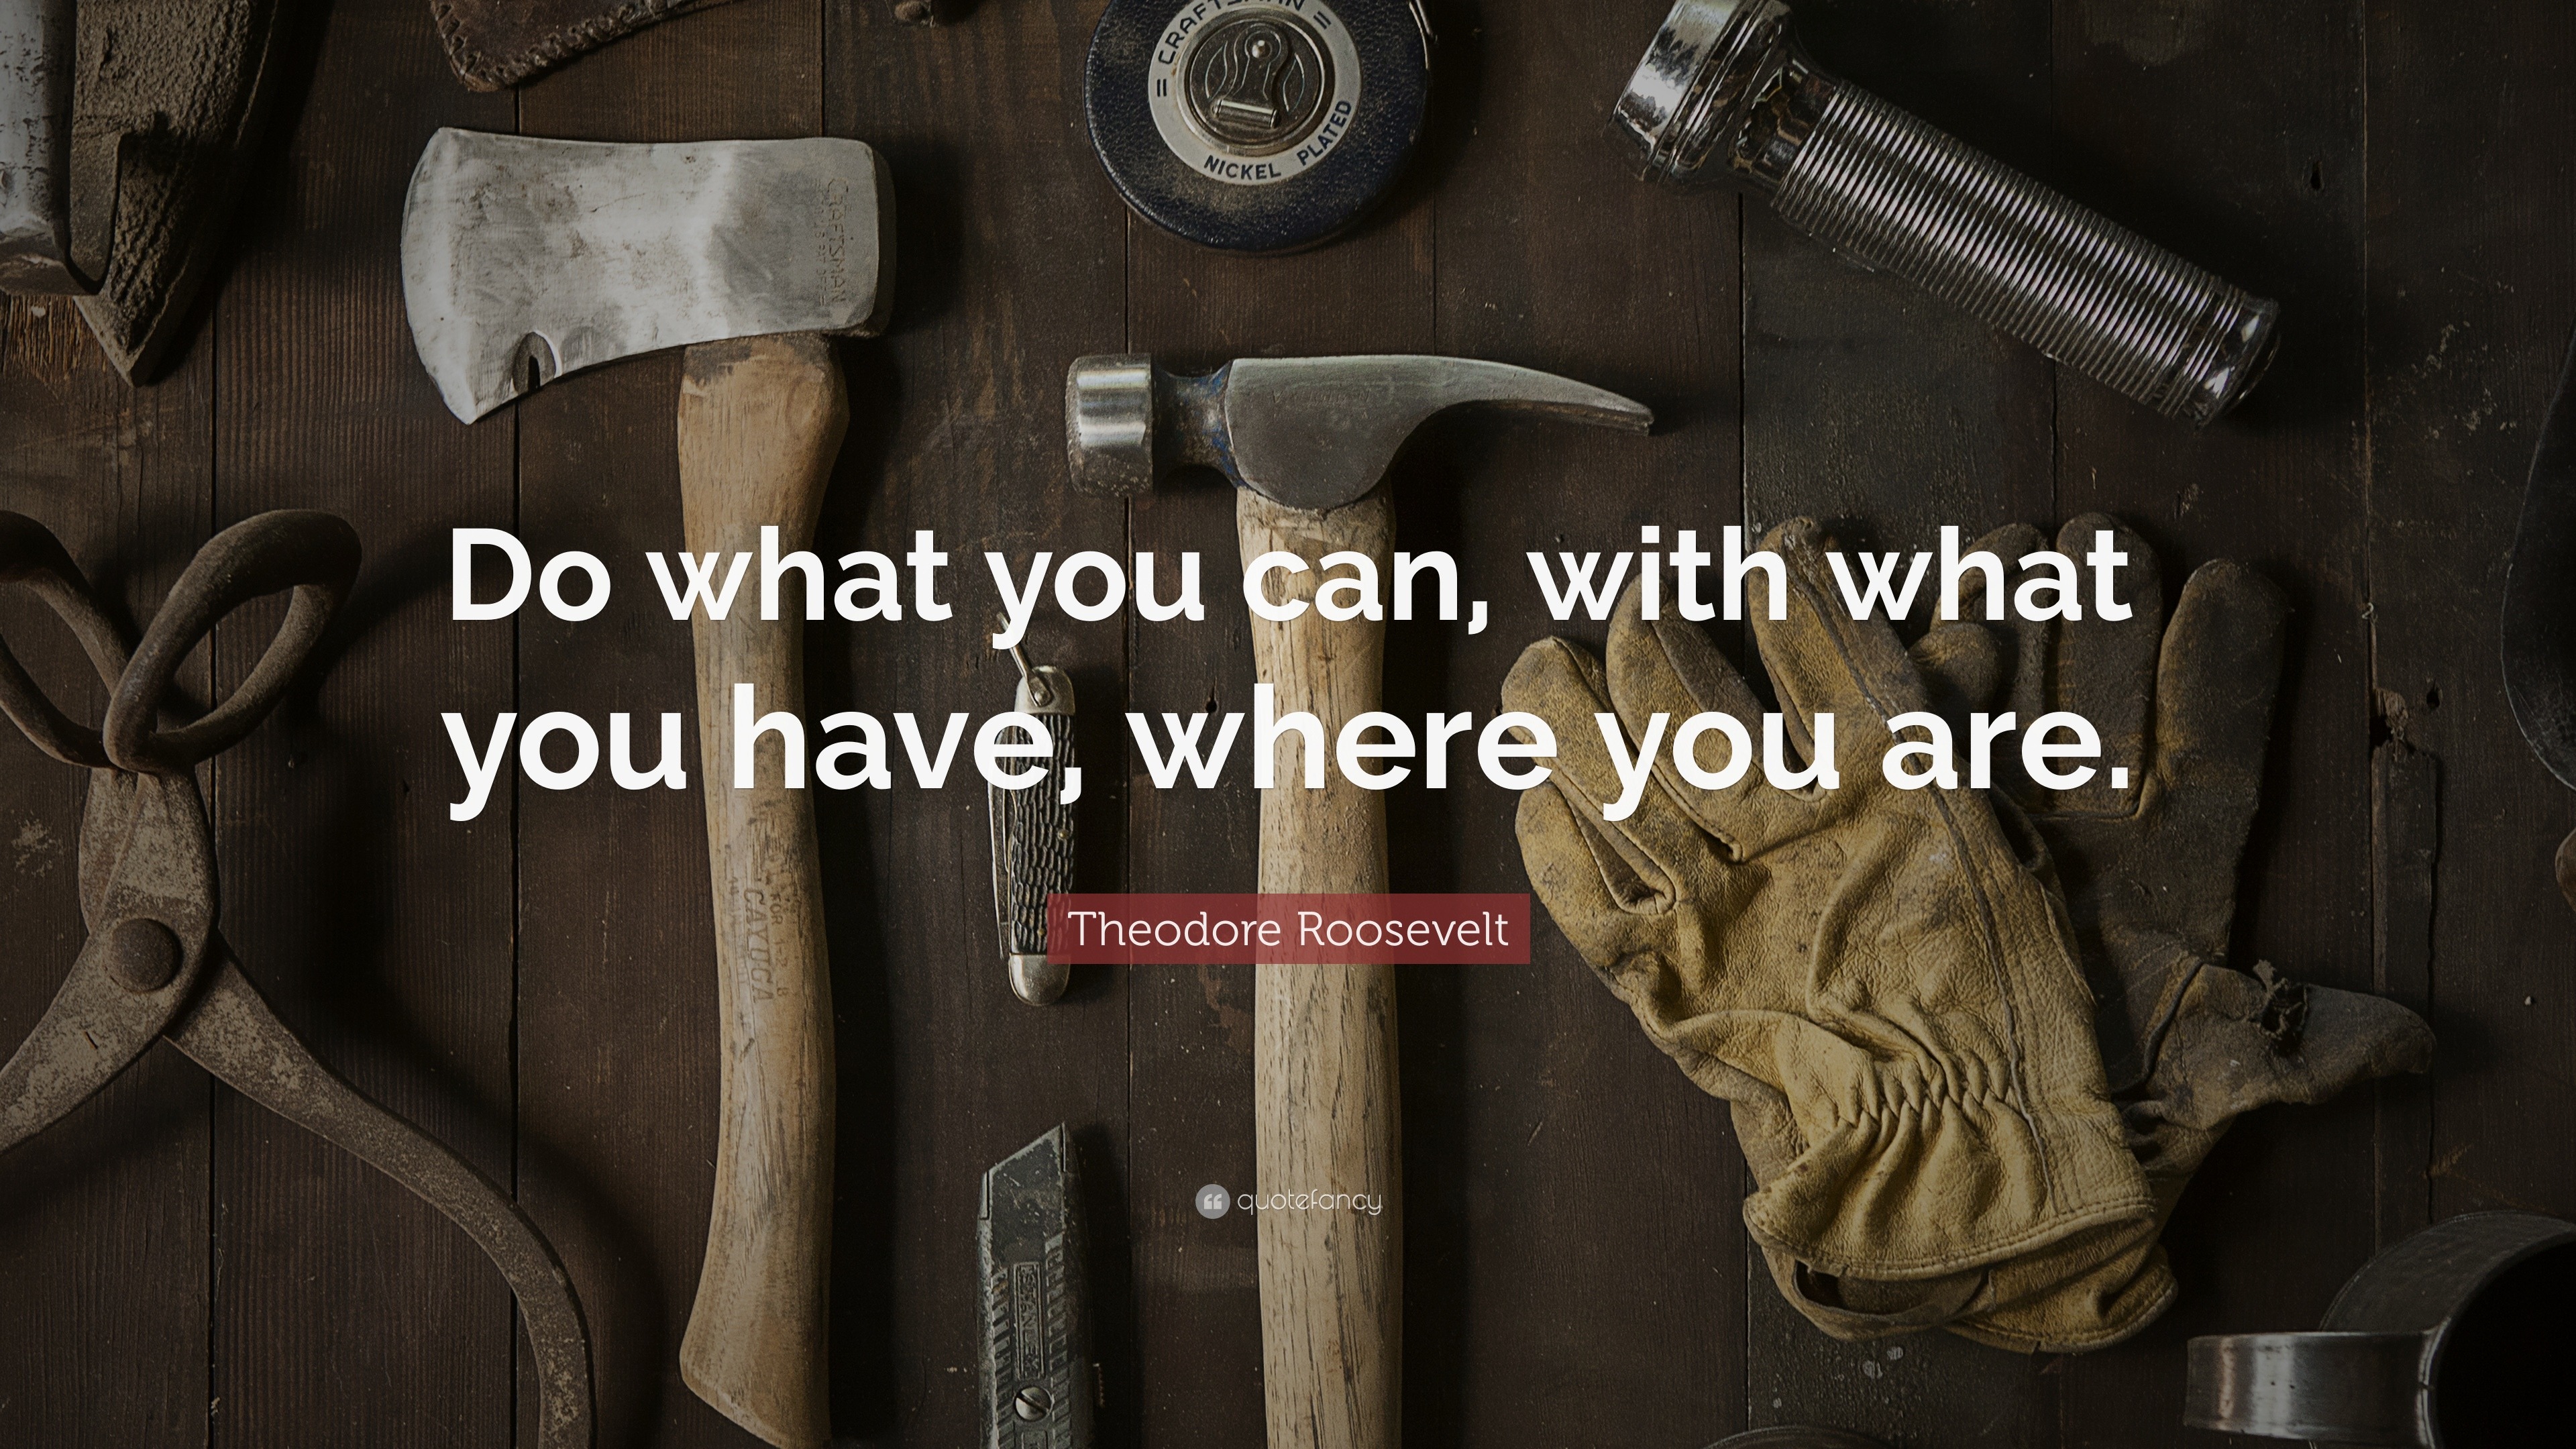 Theodore Roosevelt Quote: “Do what you can, with what you have, where